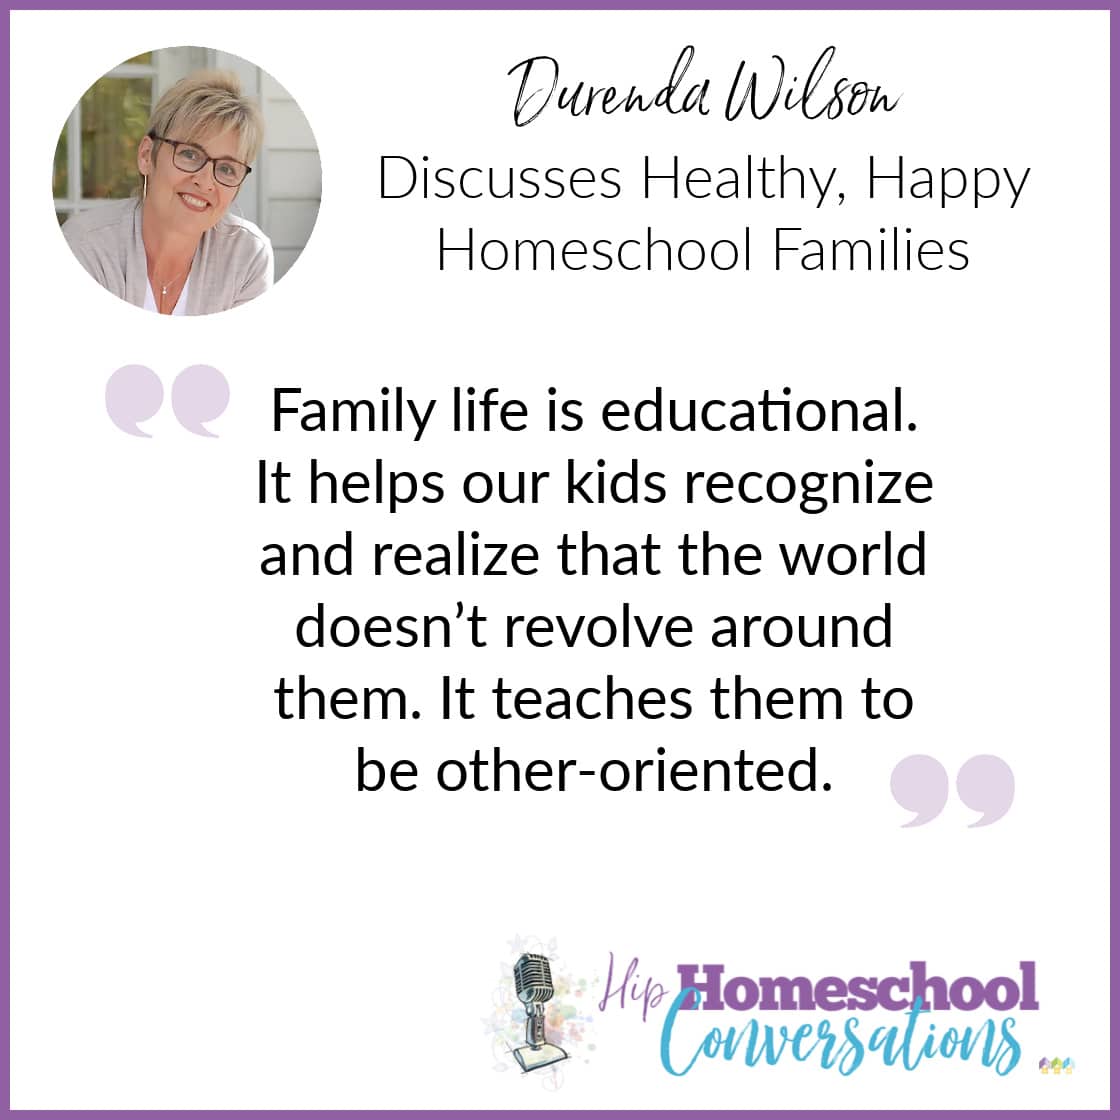 Join us to hear about Durenda’s belief in being the expert on your own children, her emphasis on flexible routines, and how fostering strong sibling relationships can all improve the homeschooling family life and, in fact, the culture around us.